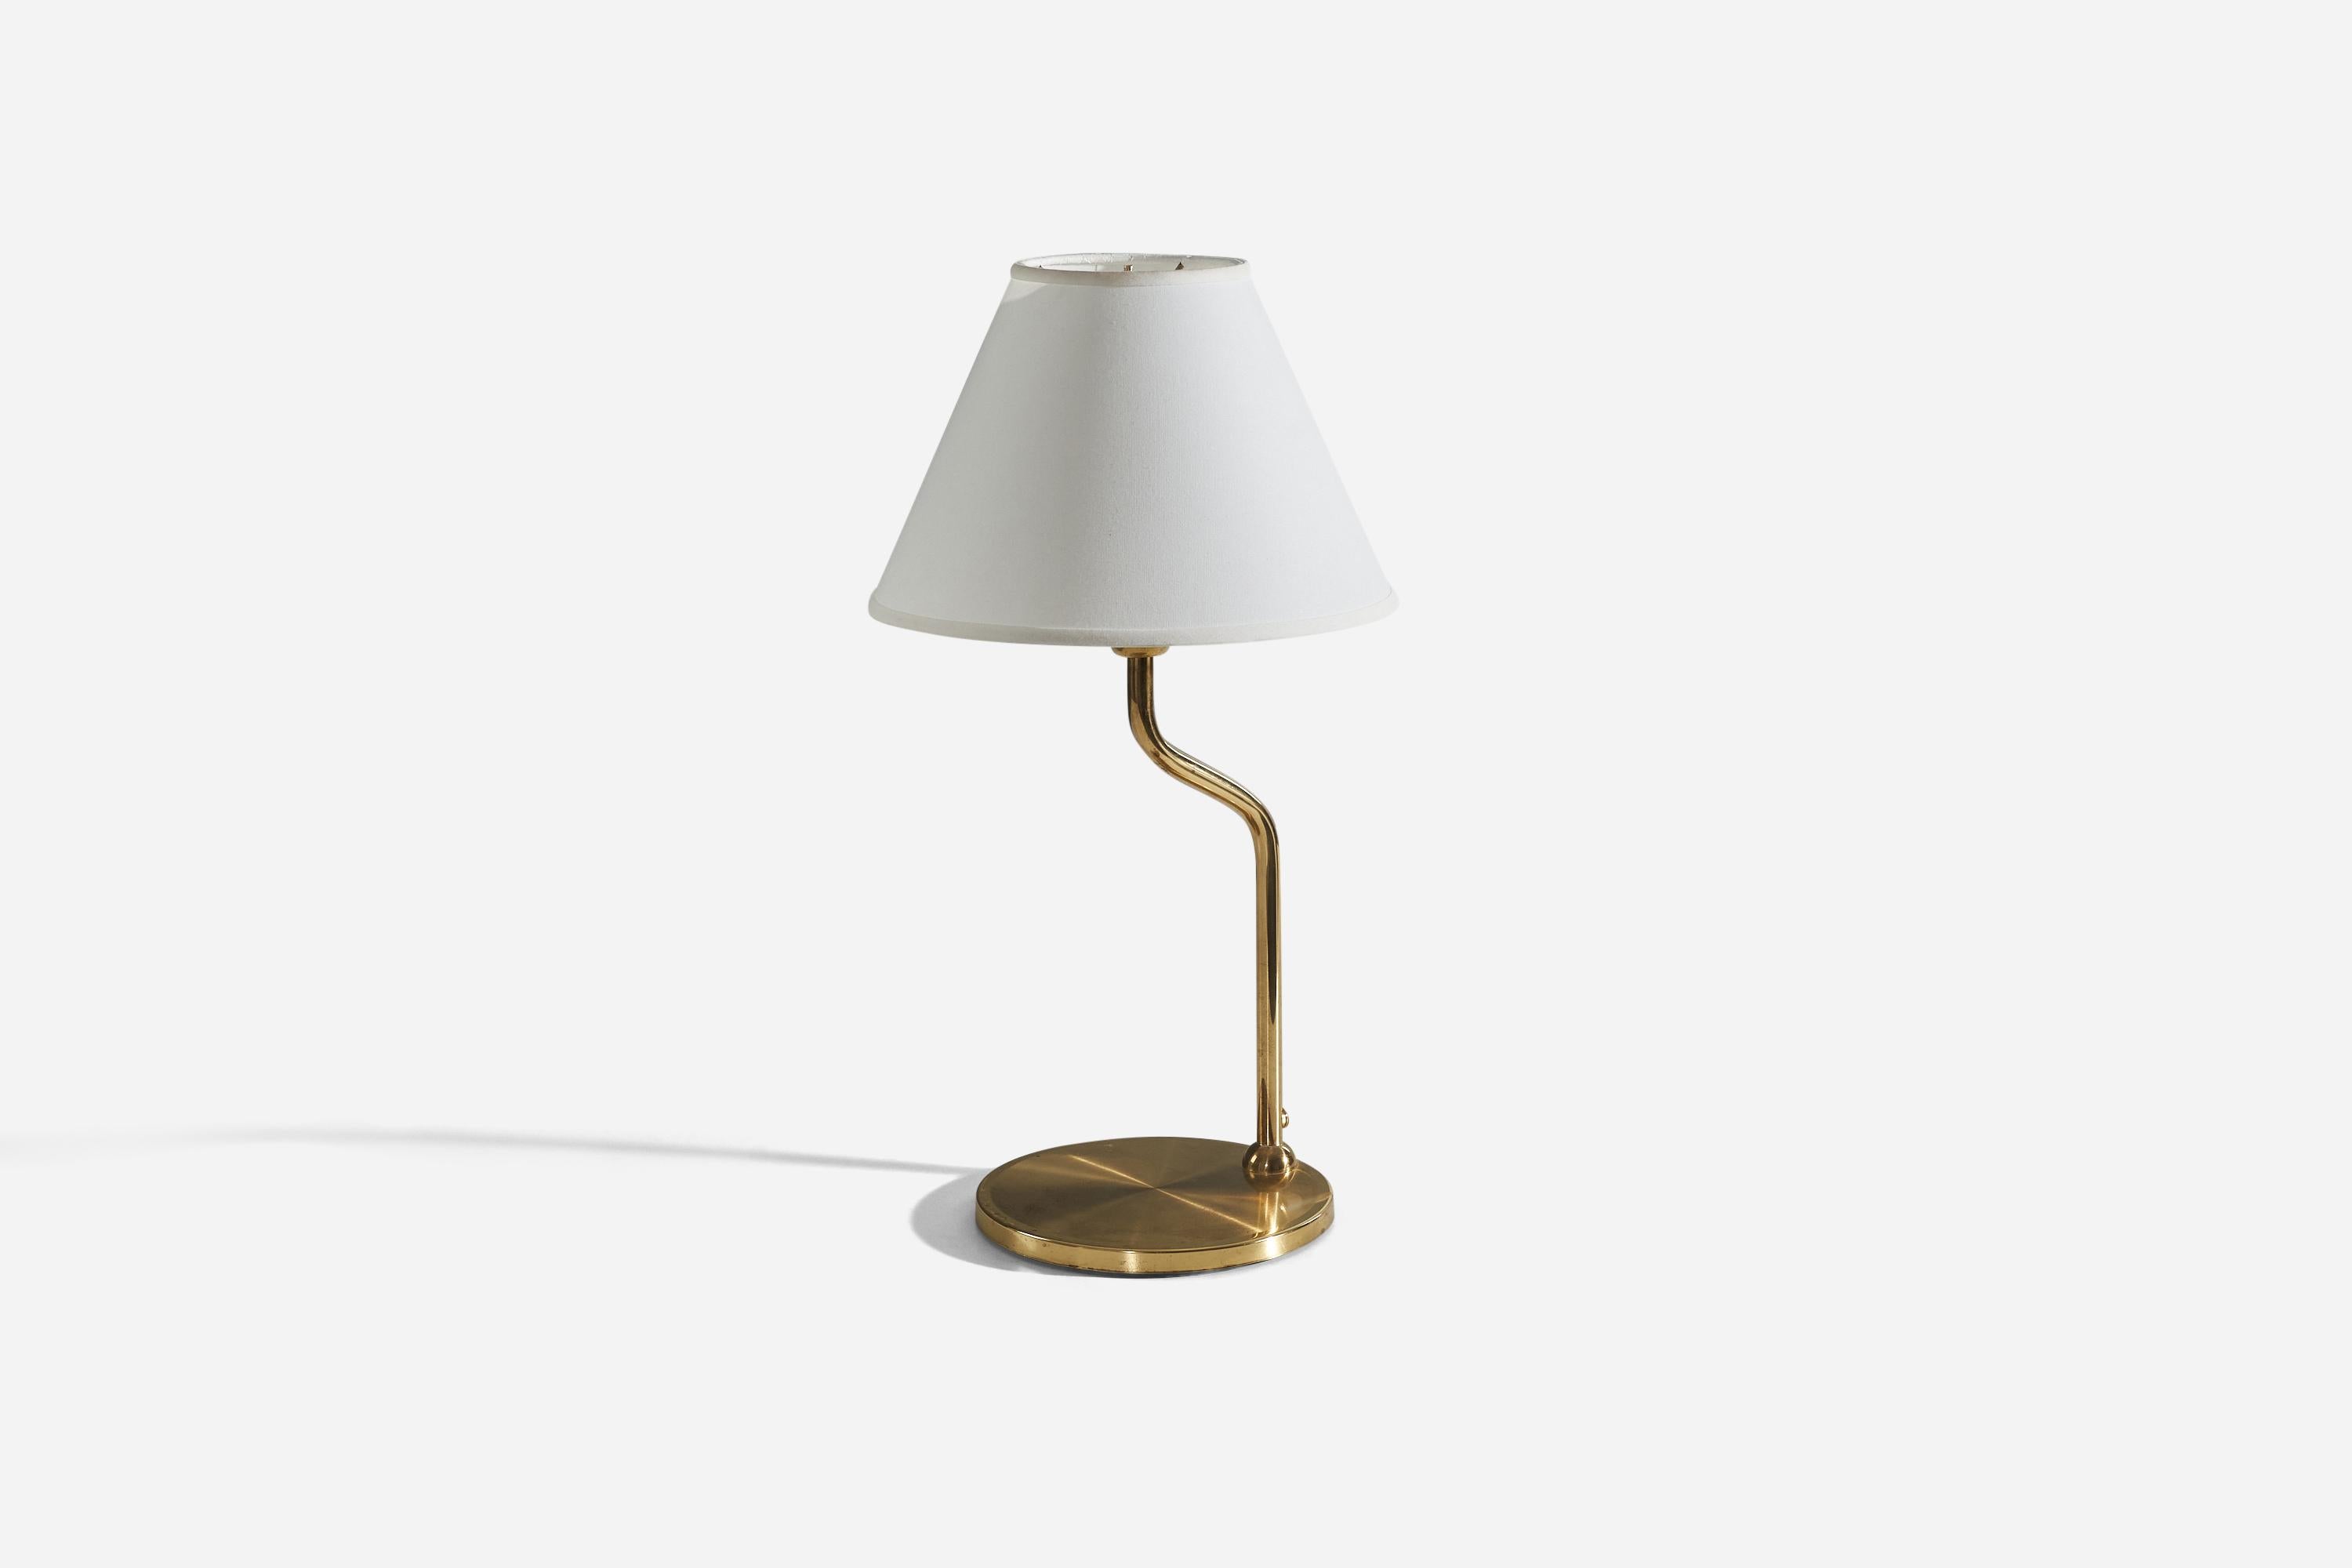 A brass table lamp designed and produced in Sweden, c. 1970s.

Sold without lampshade. 
Dimensions of Lamp (inches) : 17.18 x 8.62 x 8.62 (H x W x D)
Dimensions of Shade (inches) : 5 x 12.25 x 8.75 (T x B x S)
Dimension of Lamp with Shade